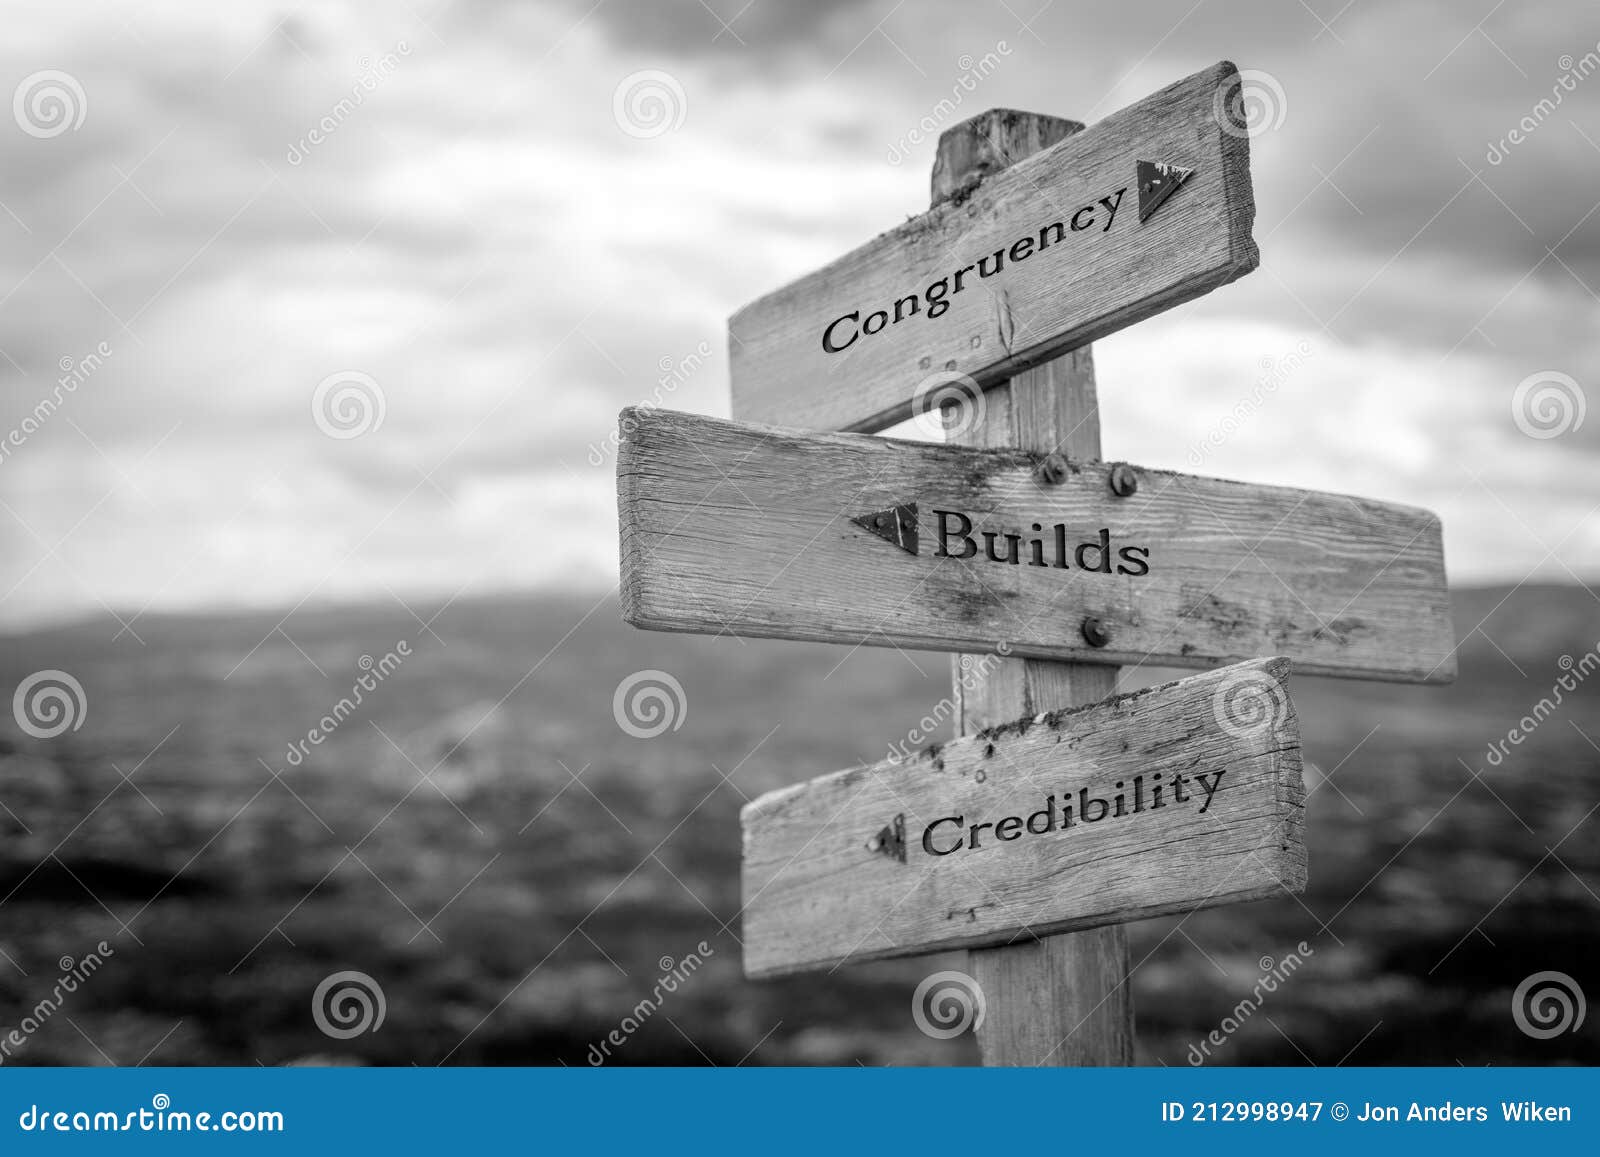 congruency builds credibility text quote on wooden signpost